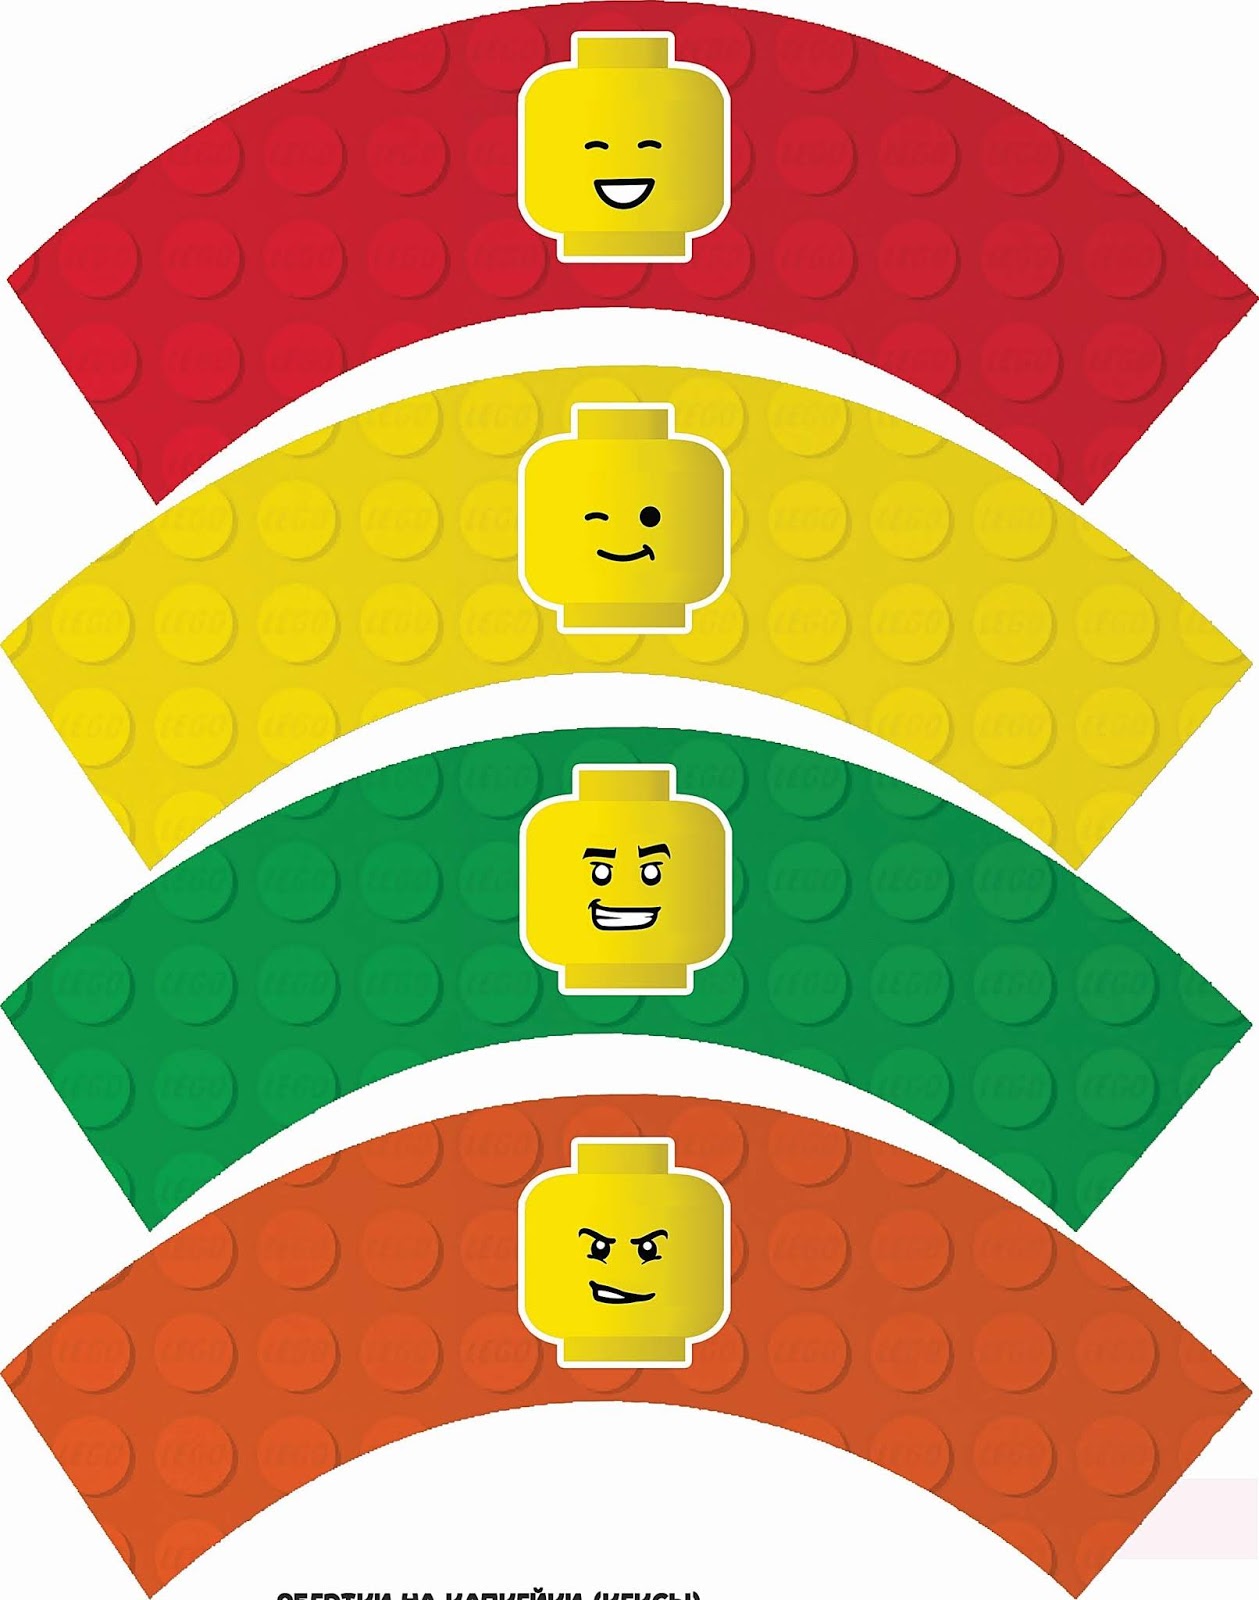 lego-party-free-printable-cupcake-wrappers-and-toppers-oh-my-fiesta-for-geeks